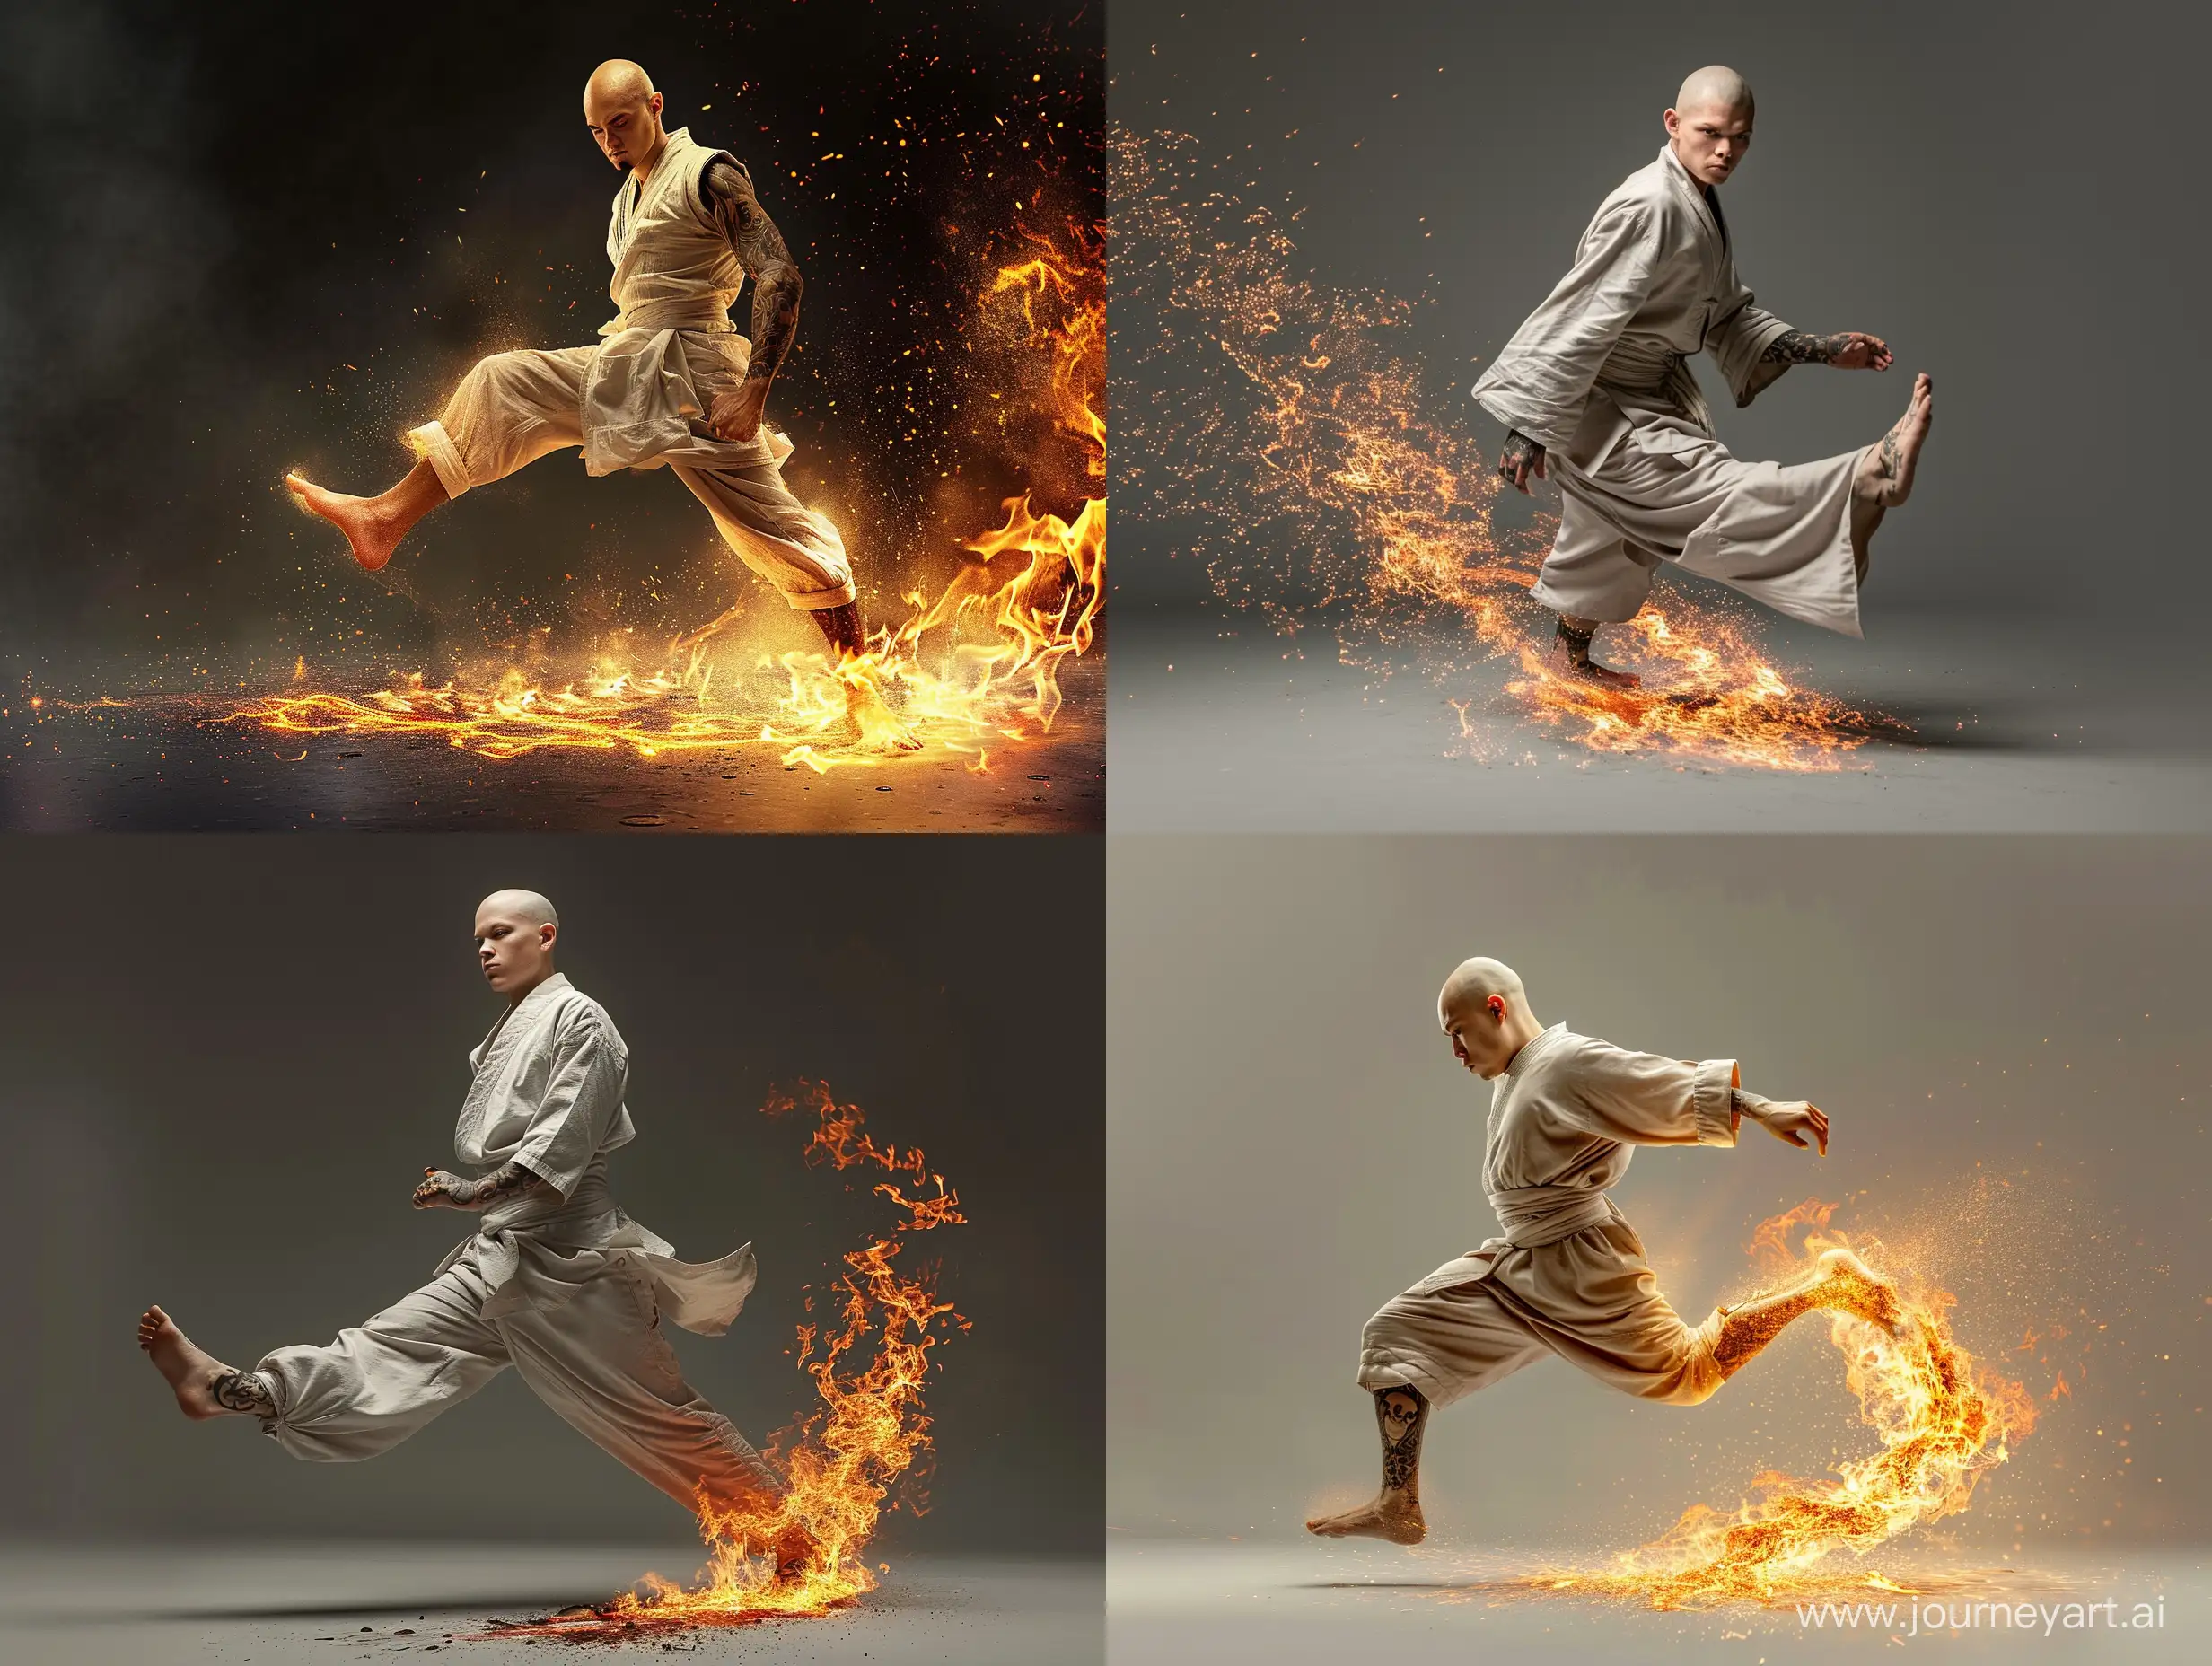 Young-Bald-Monk-Man-Creating-Fiery-Trail-with-Martial-Arts